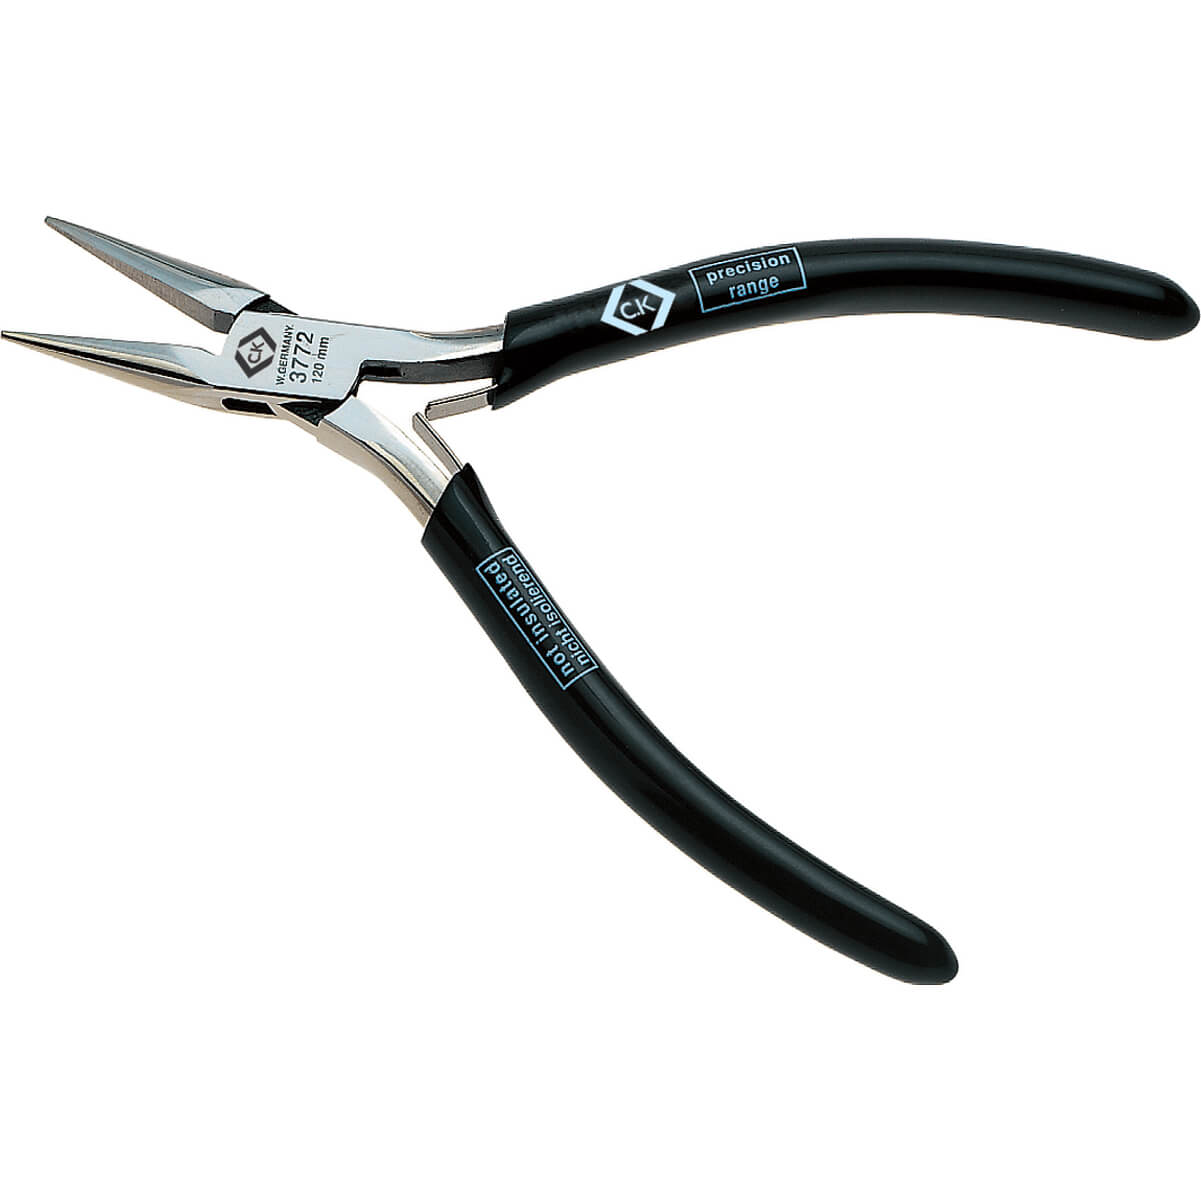 Image of CK Precision Snipe Nose Pliers 120mm